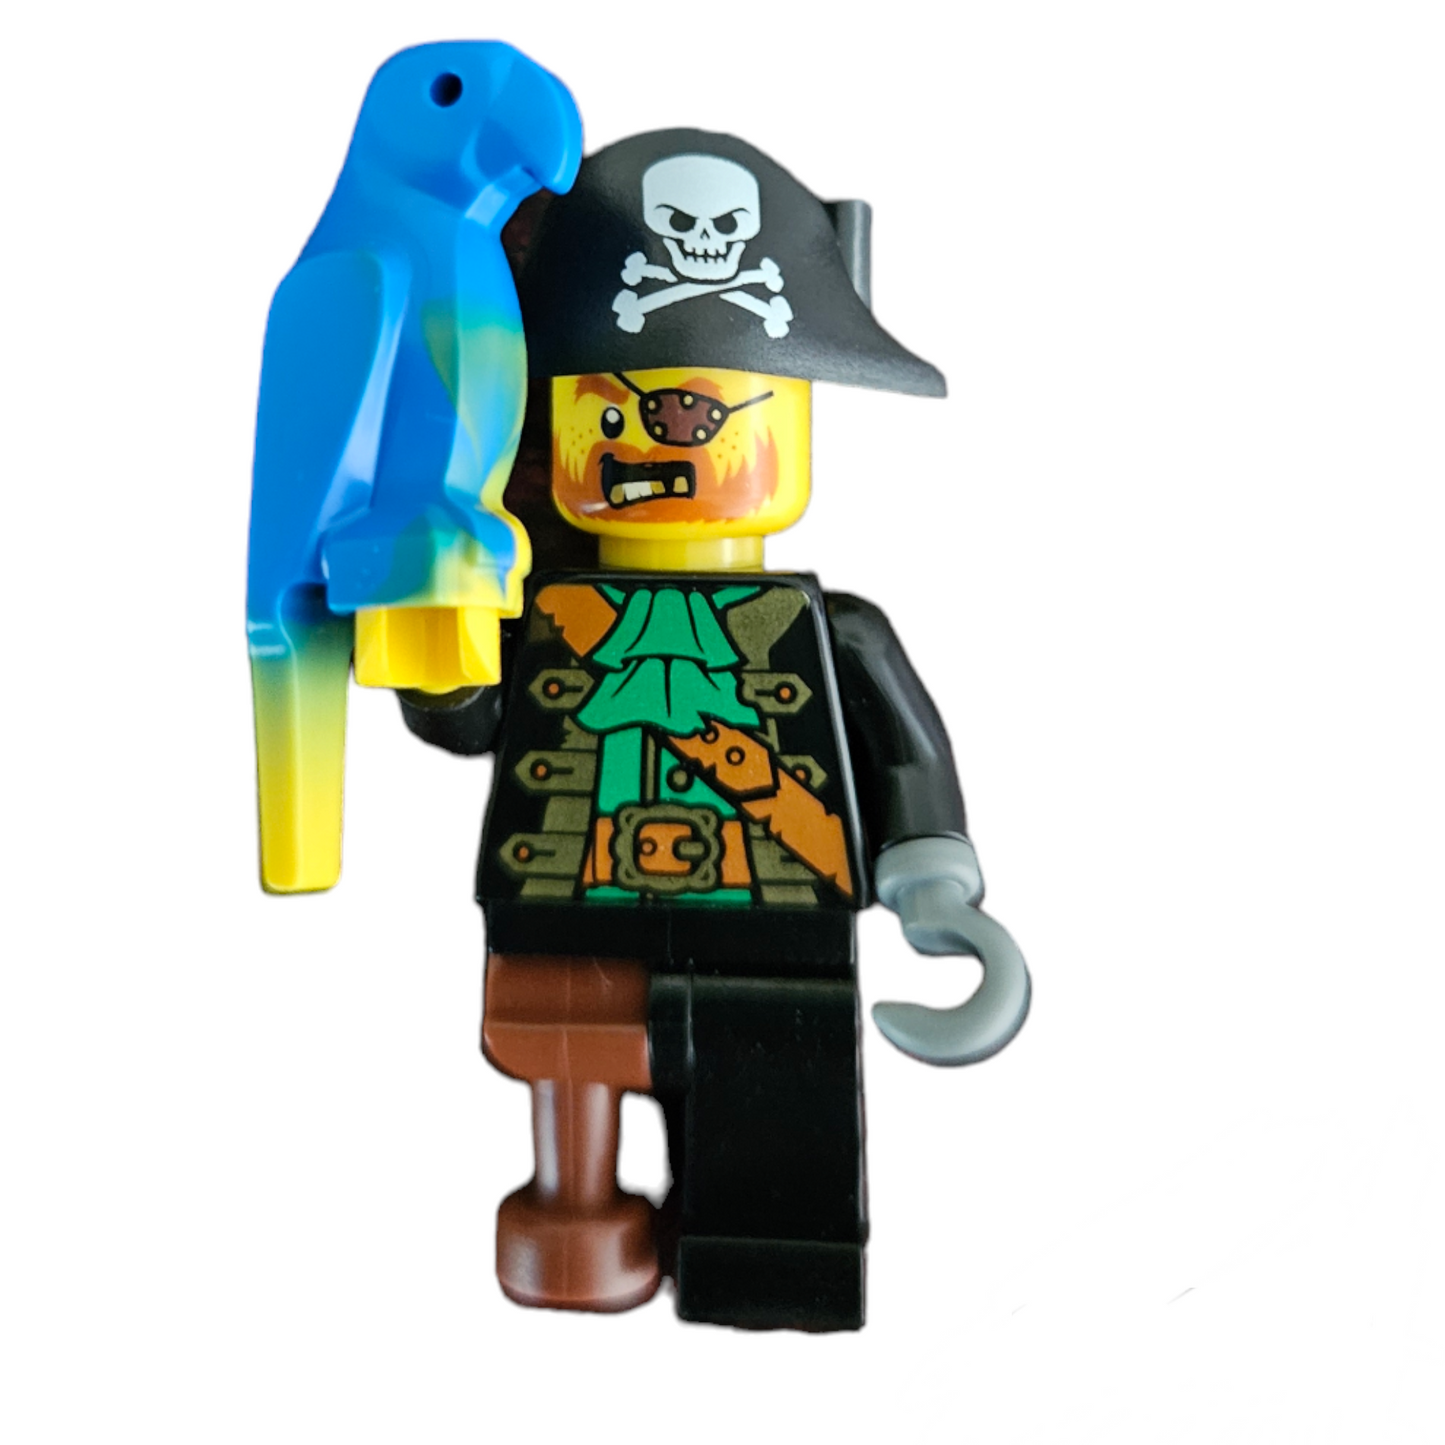 Pirate Captain one leg and hook hand with Parrot Lego minifigure